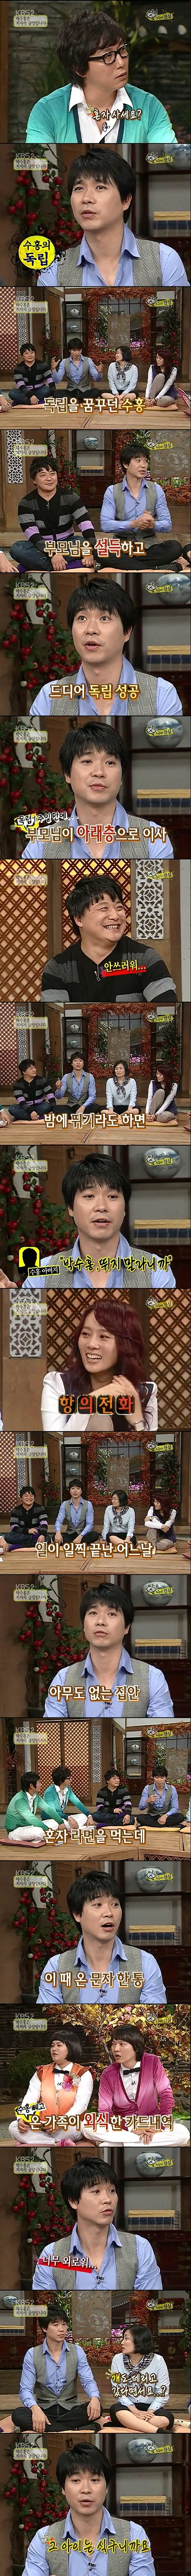 Park Soo-hong sheds tears on yesterday's broadcast.